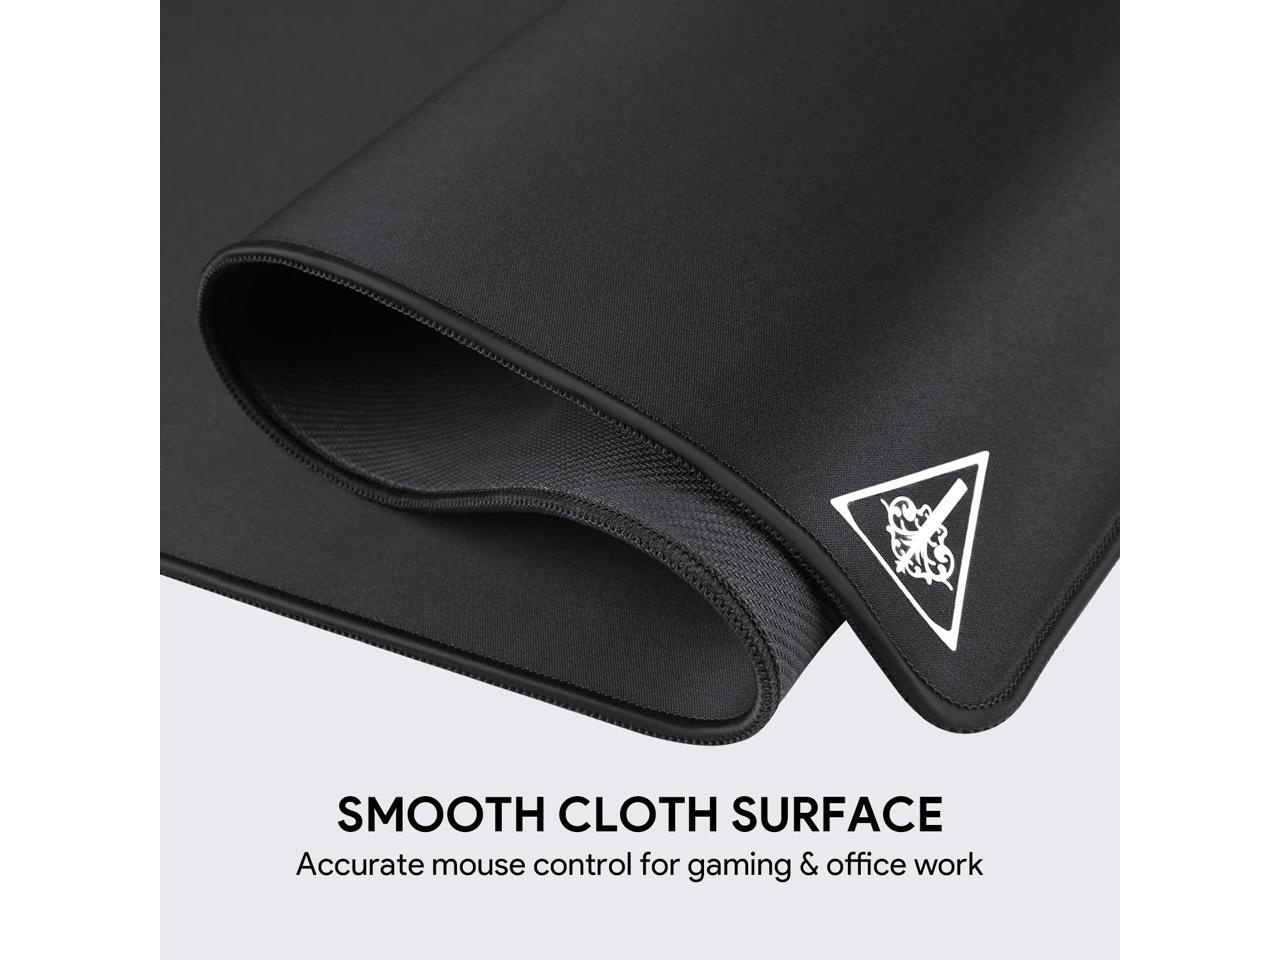 AUKEY Gaming Mouse Pad Large XXL (35.4 x 15.75 x 0.15in) Thick Extended  Mouse Mat Non-Slip Spill-Resistant Desk Pad with Special-Textured Surface